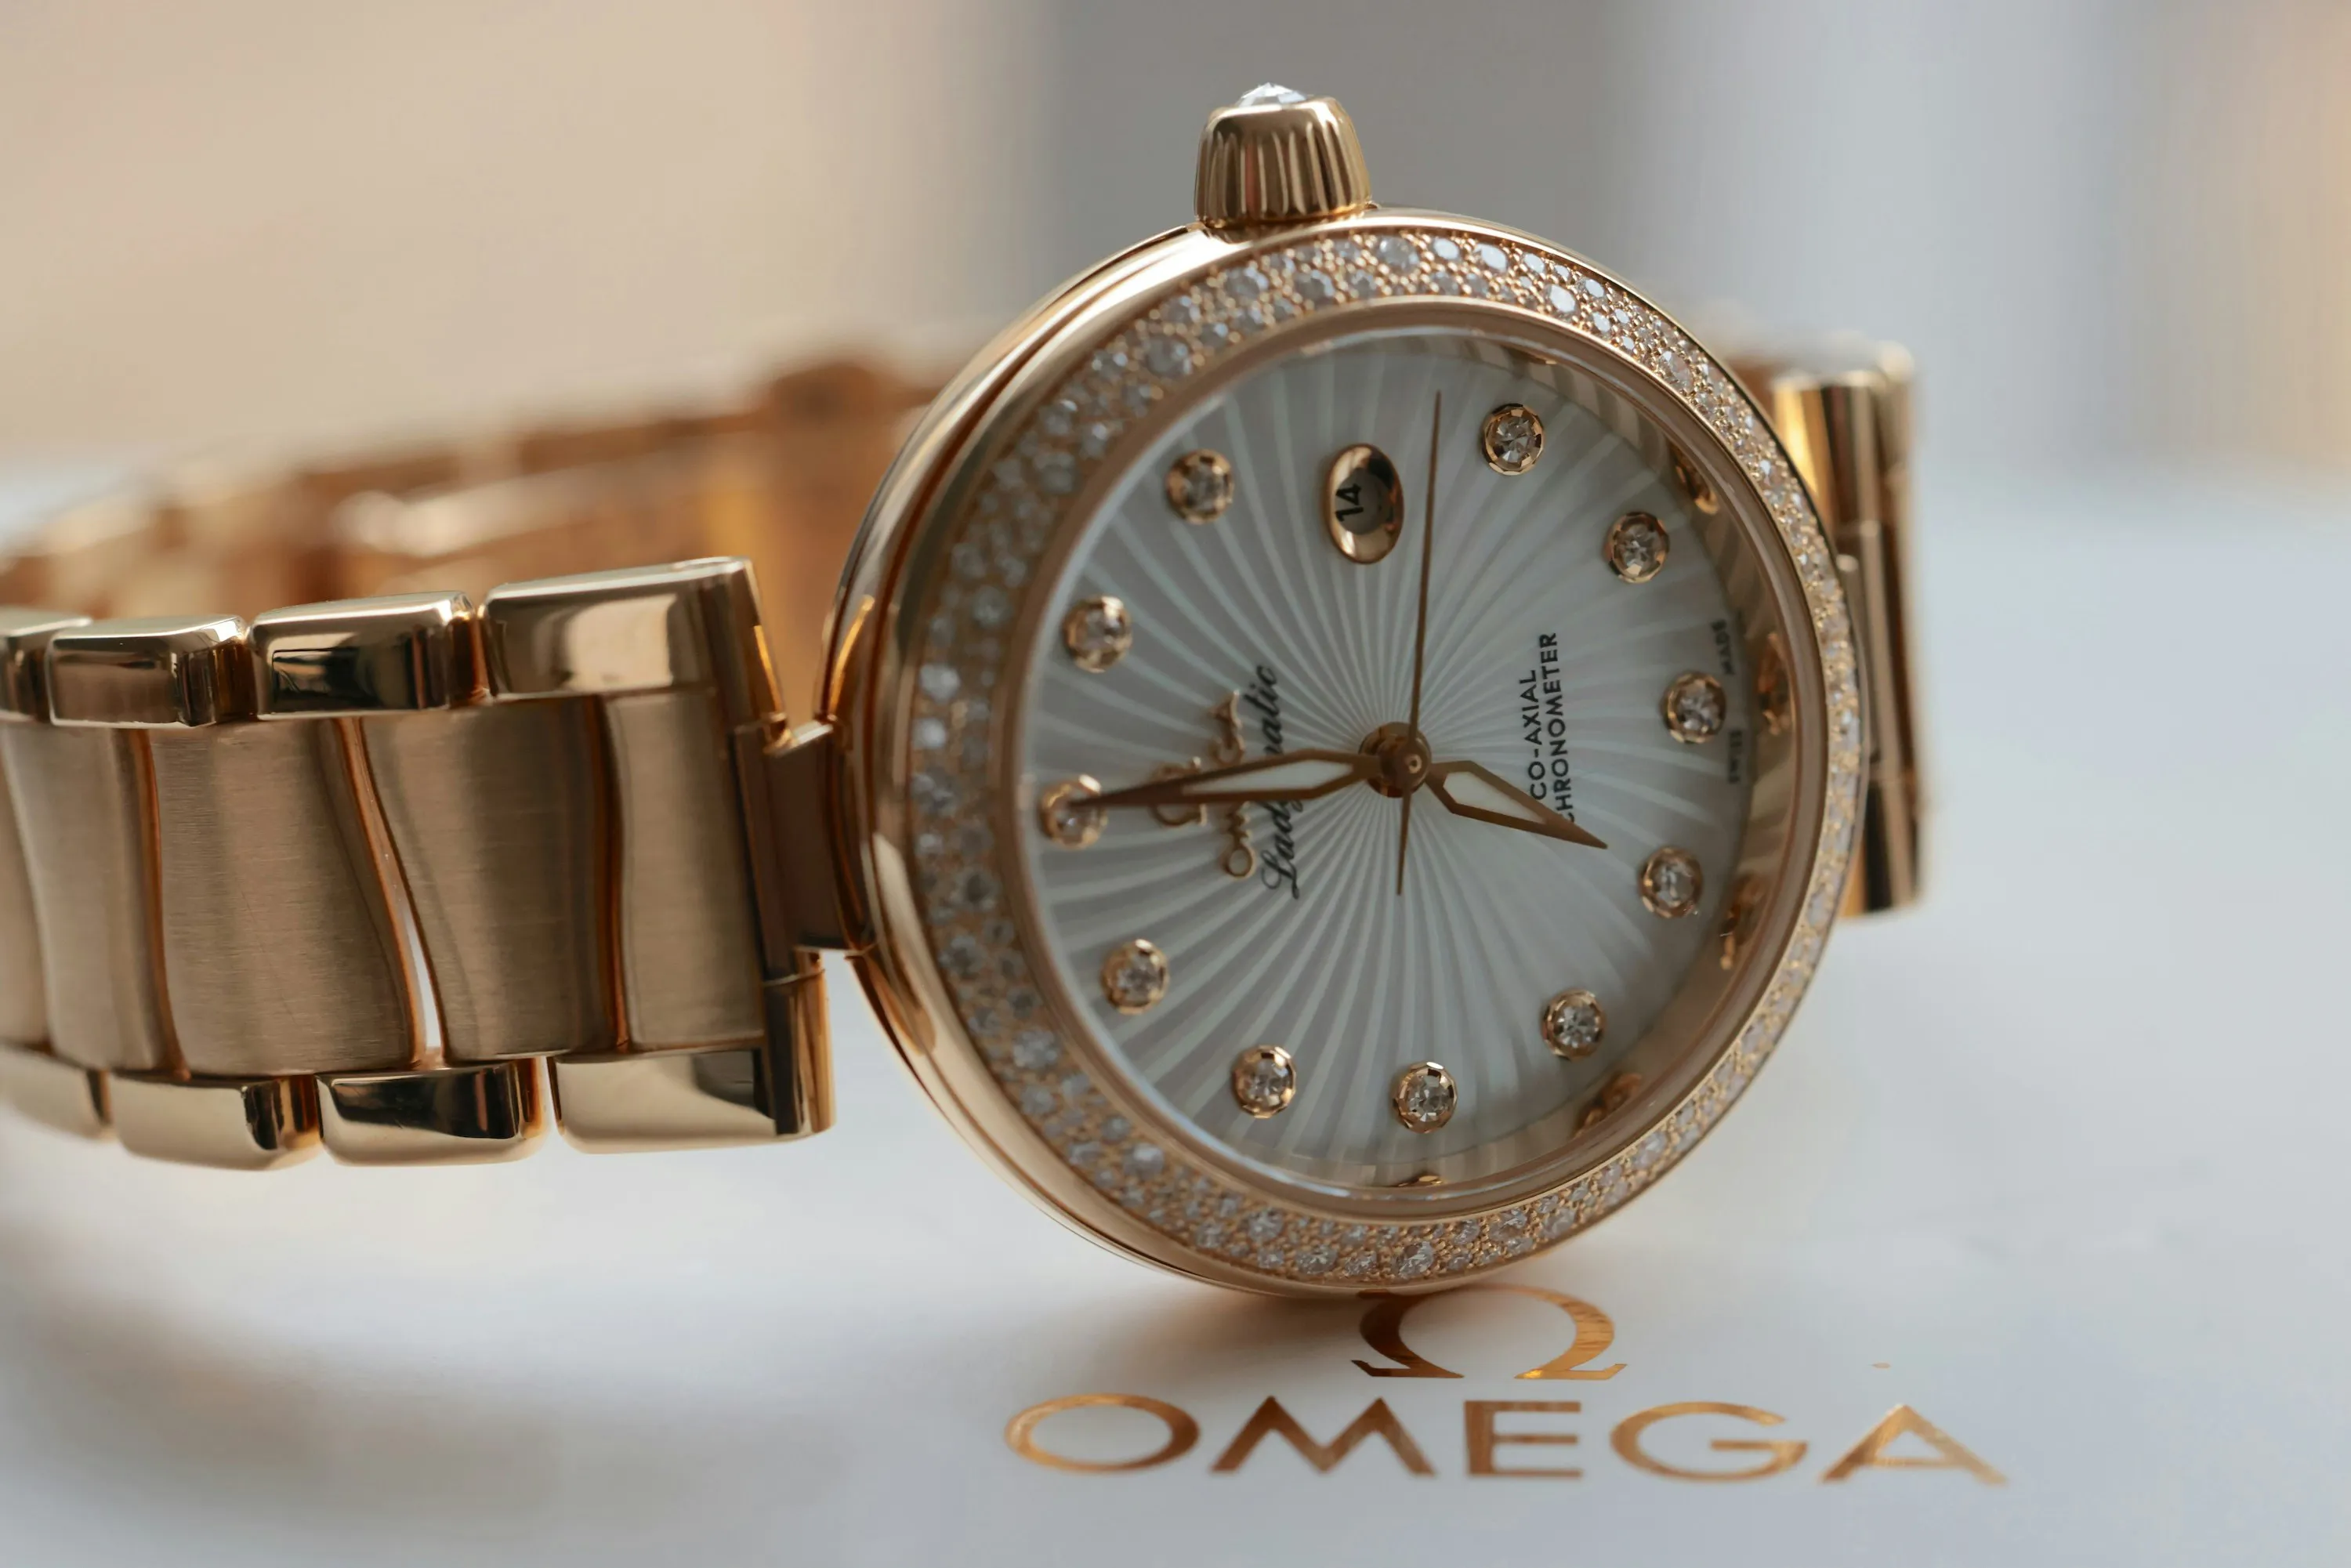 Omega De Ville Ladymatic 425.65.34.20.55.002 34mm Yellow gold and diamond-set Silver